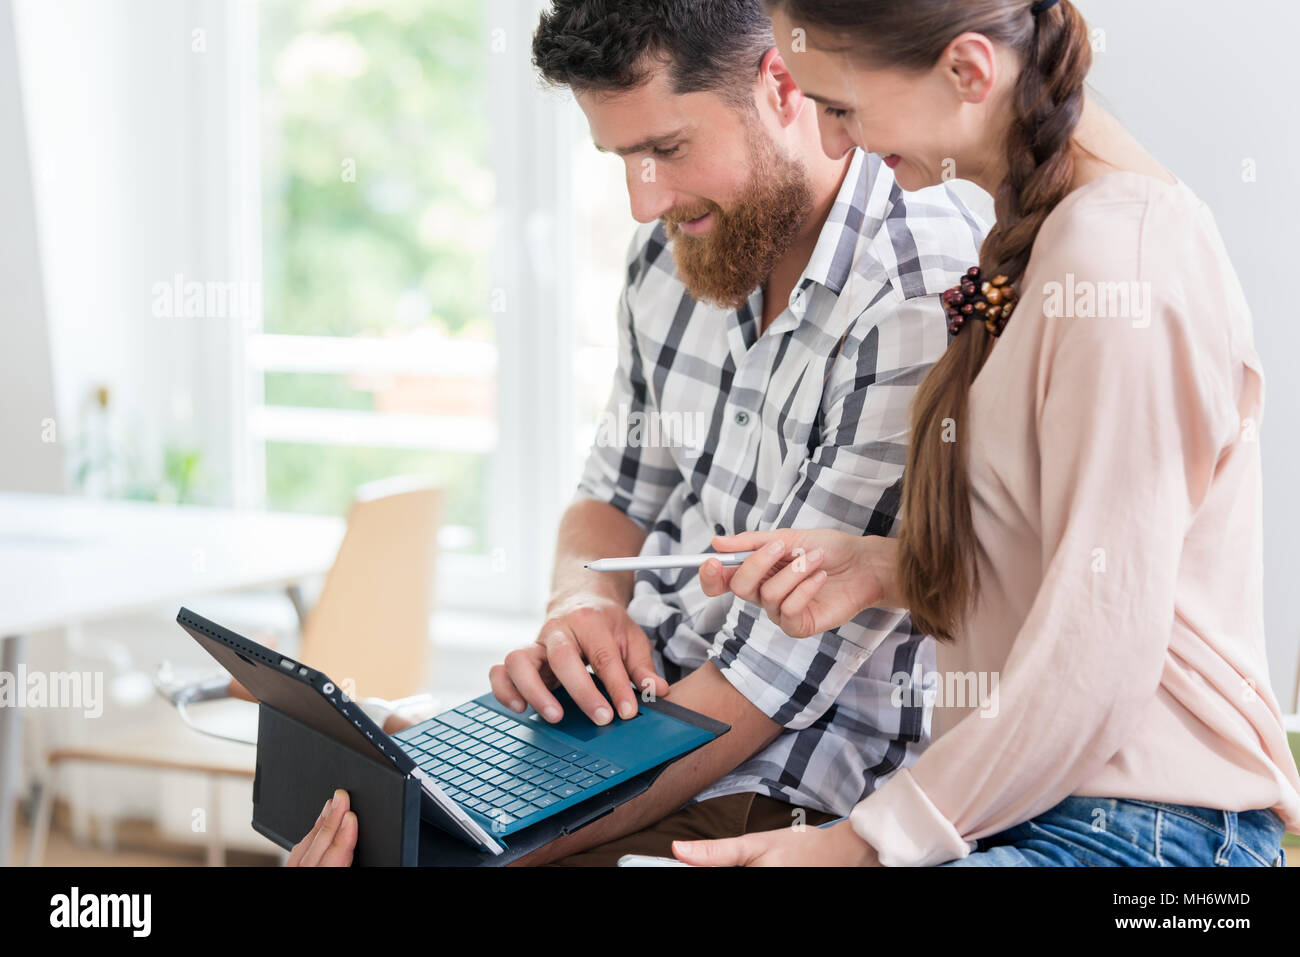 Cheerful young man collaborating with his female co-worker Stock Photo